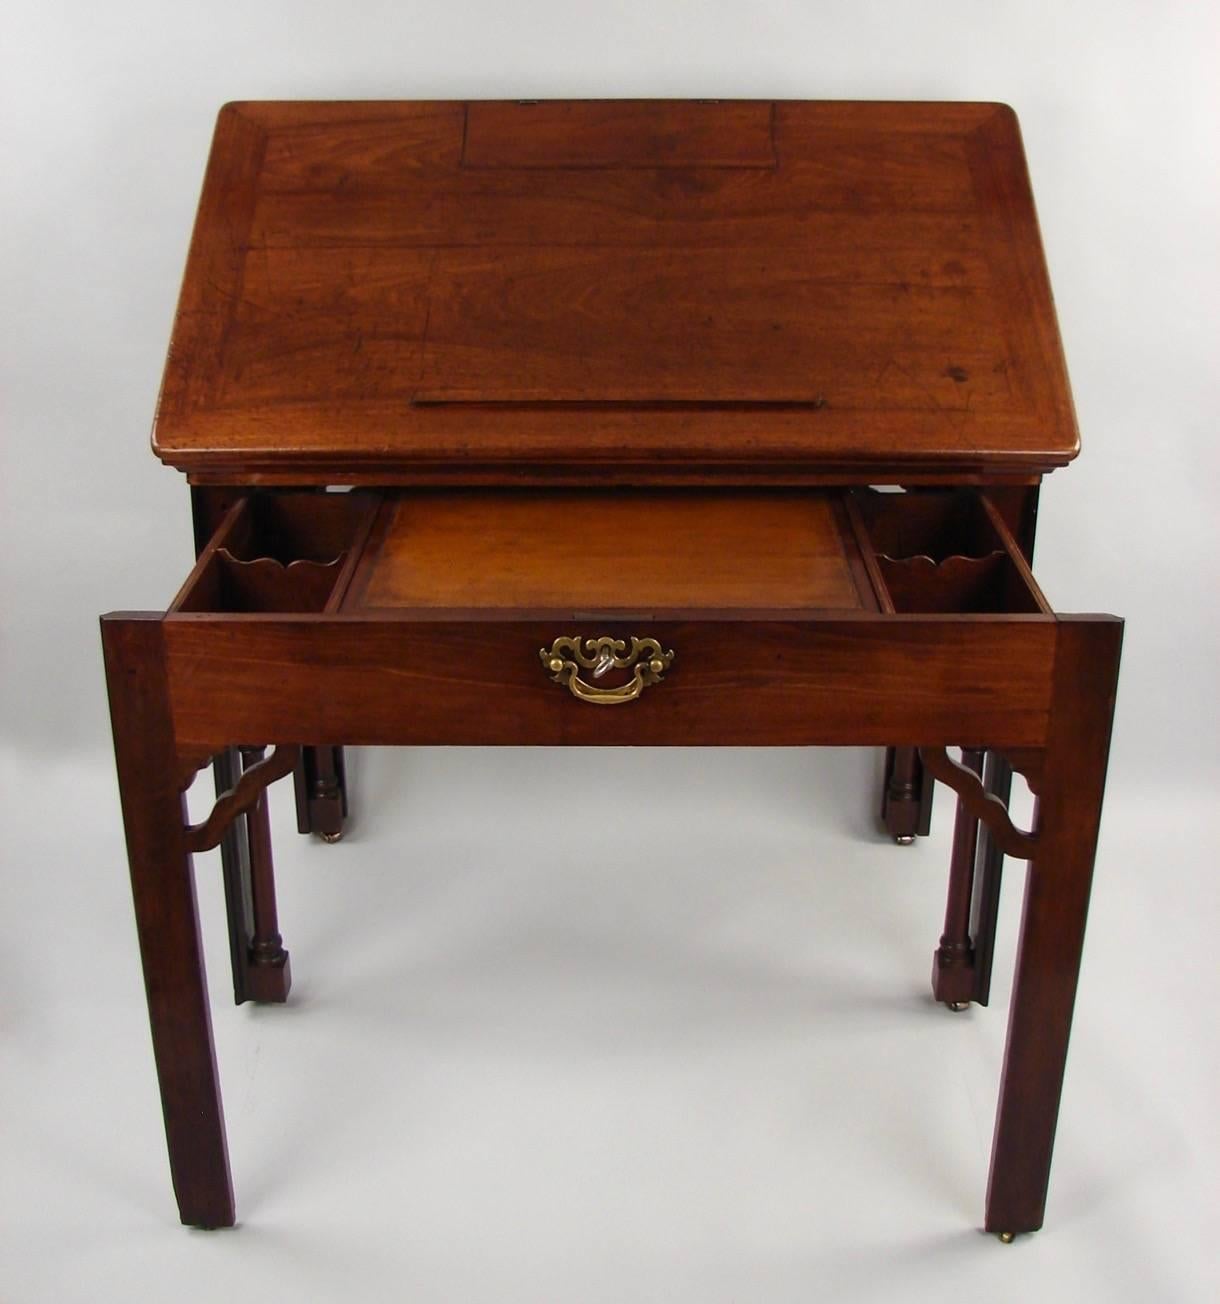 A George II period mahogany drafting or architect's table, the adjustable top with a built-in bookrest and a separate adjustable candle support, the pull-out interior with a retractable brown tooled leather surface flanked by wells, all supported on